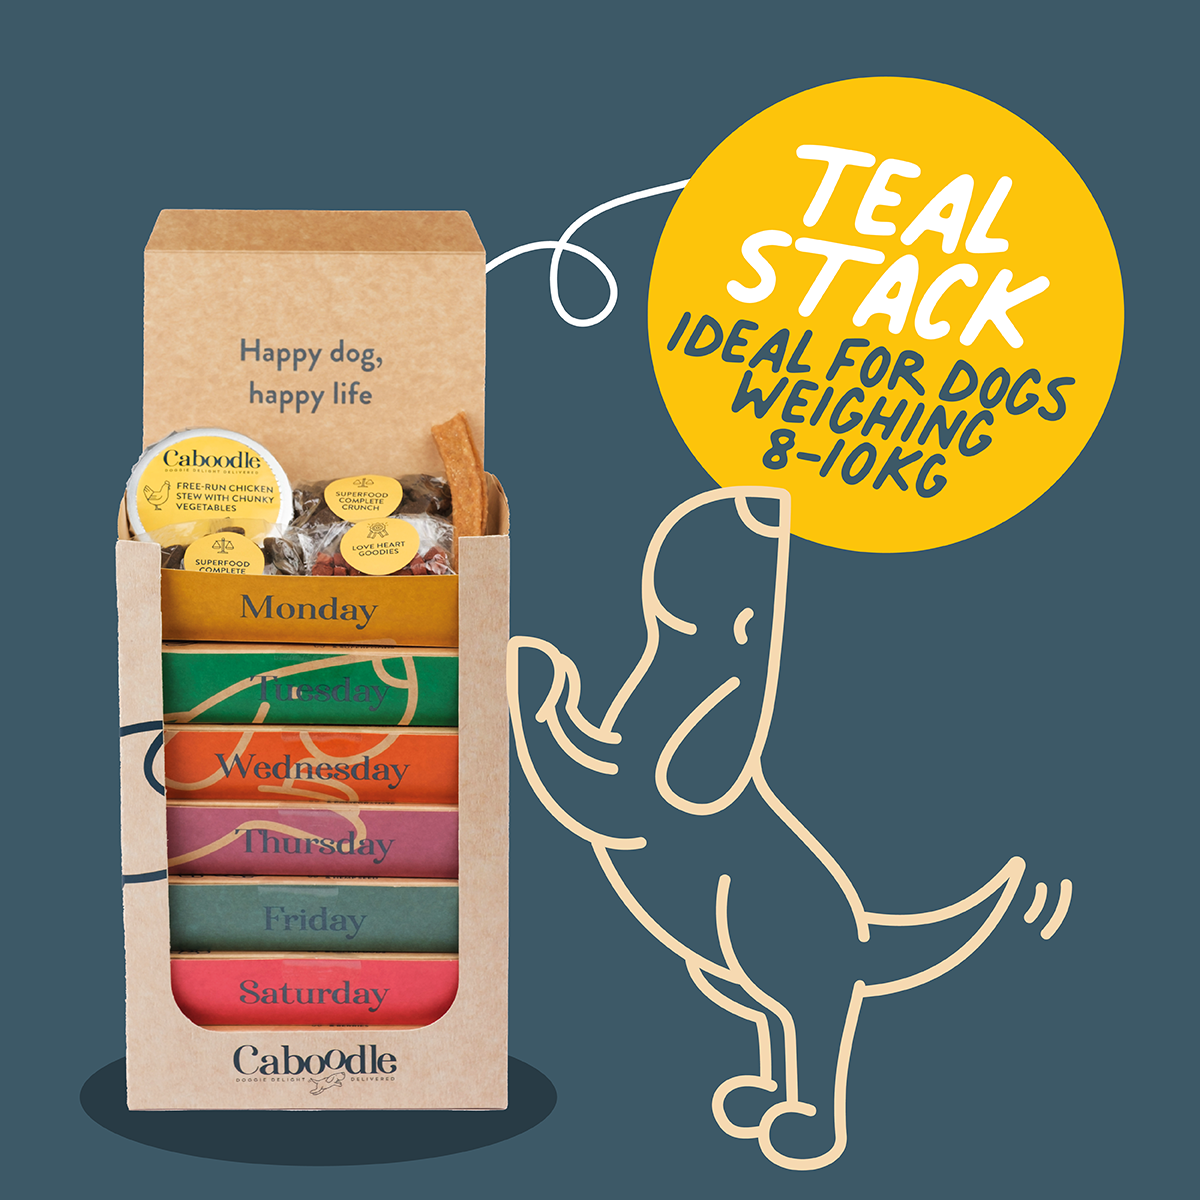 Daily Dog Food Boxes in Weekly Stacks - Teal (8-10kg's) – Caboodle